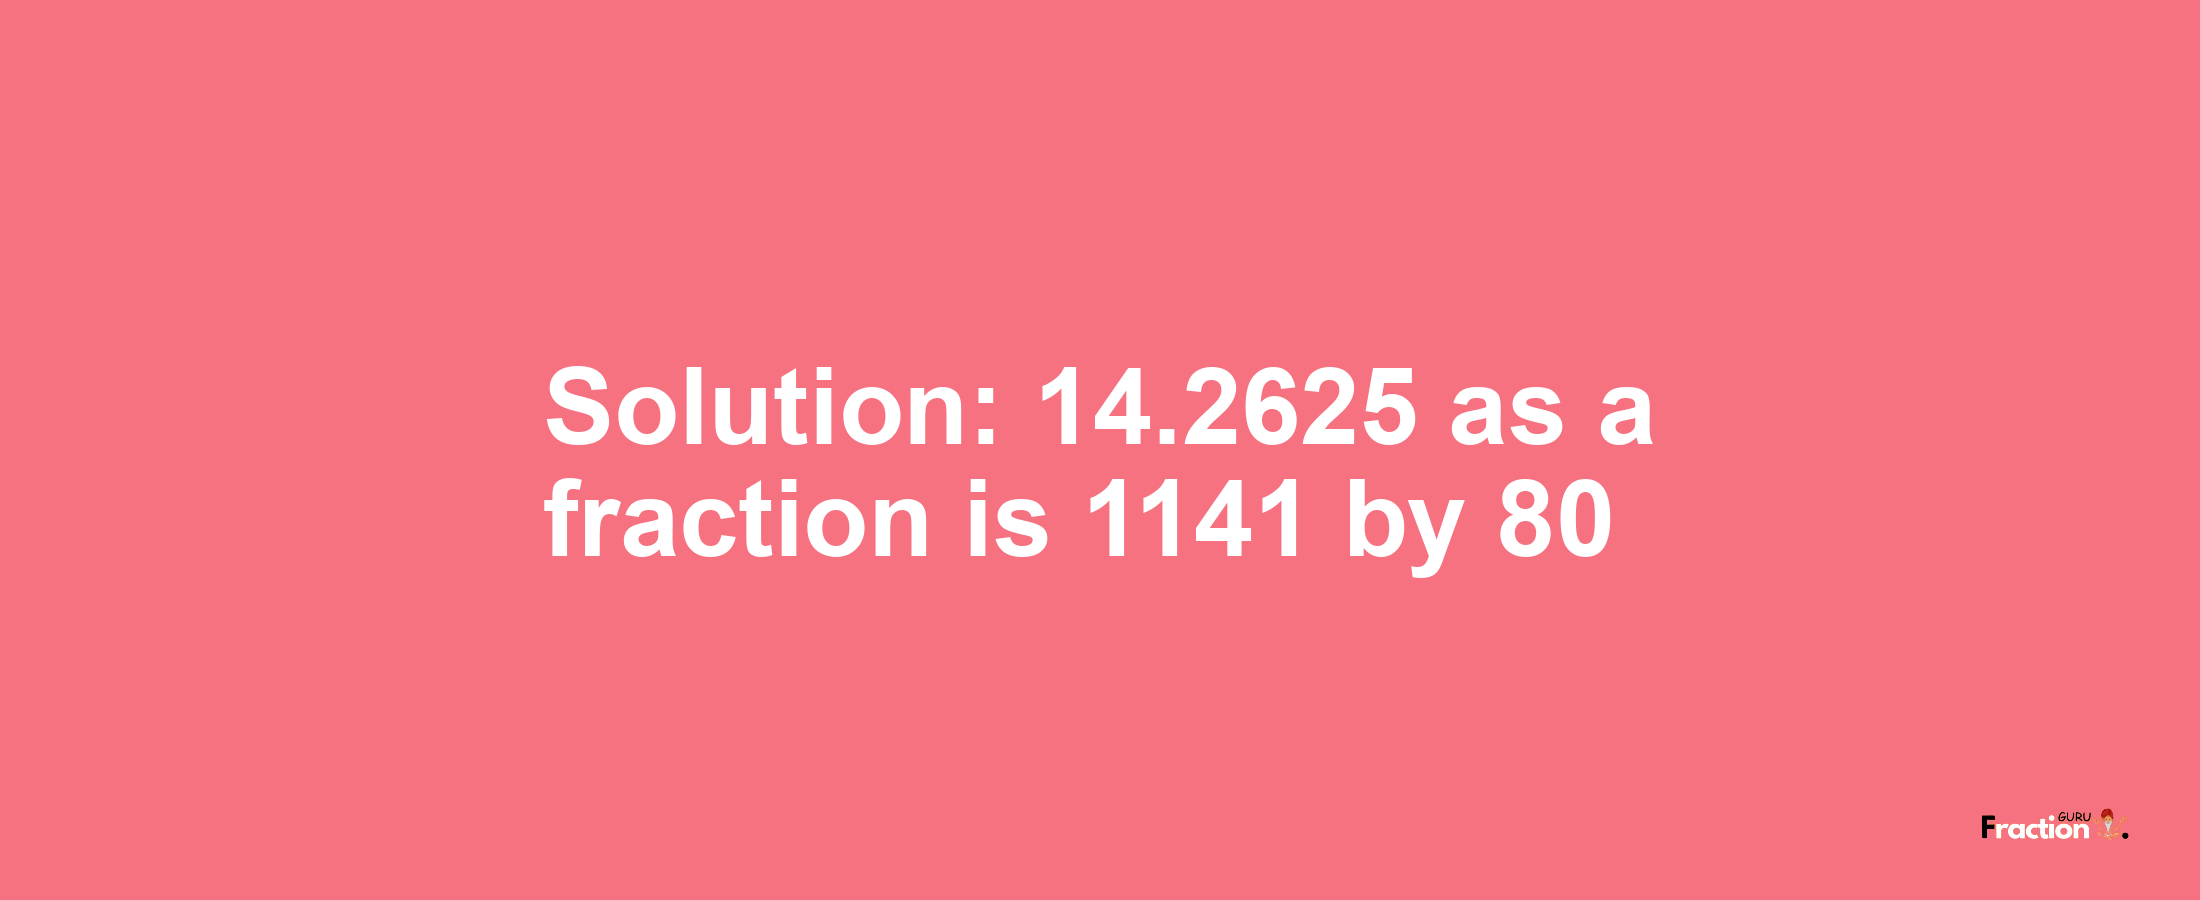 Solution:14.2625 as a fraction is 1141/80